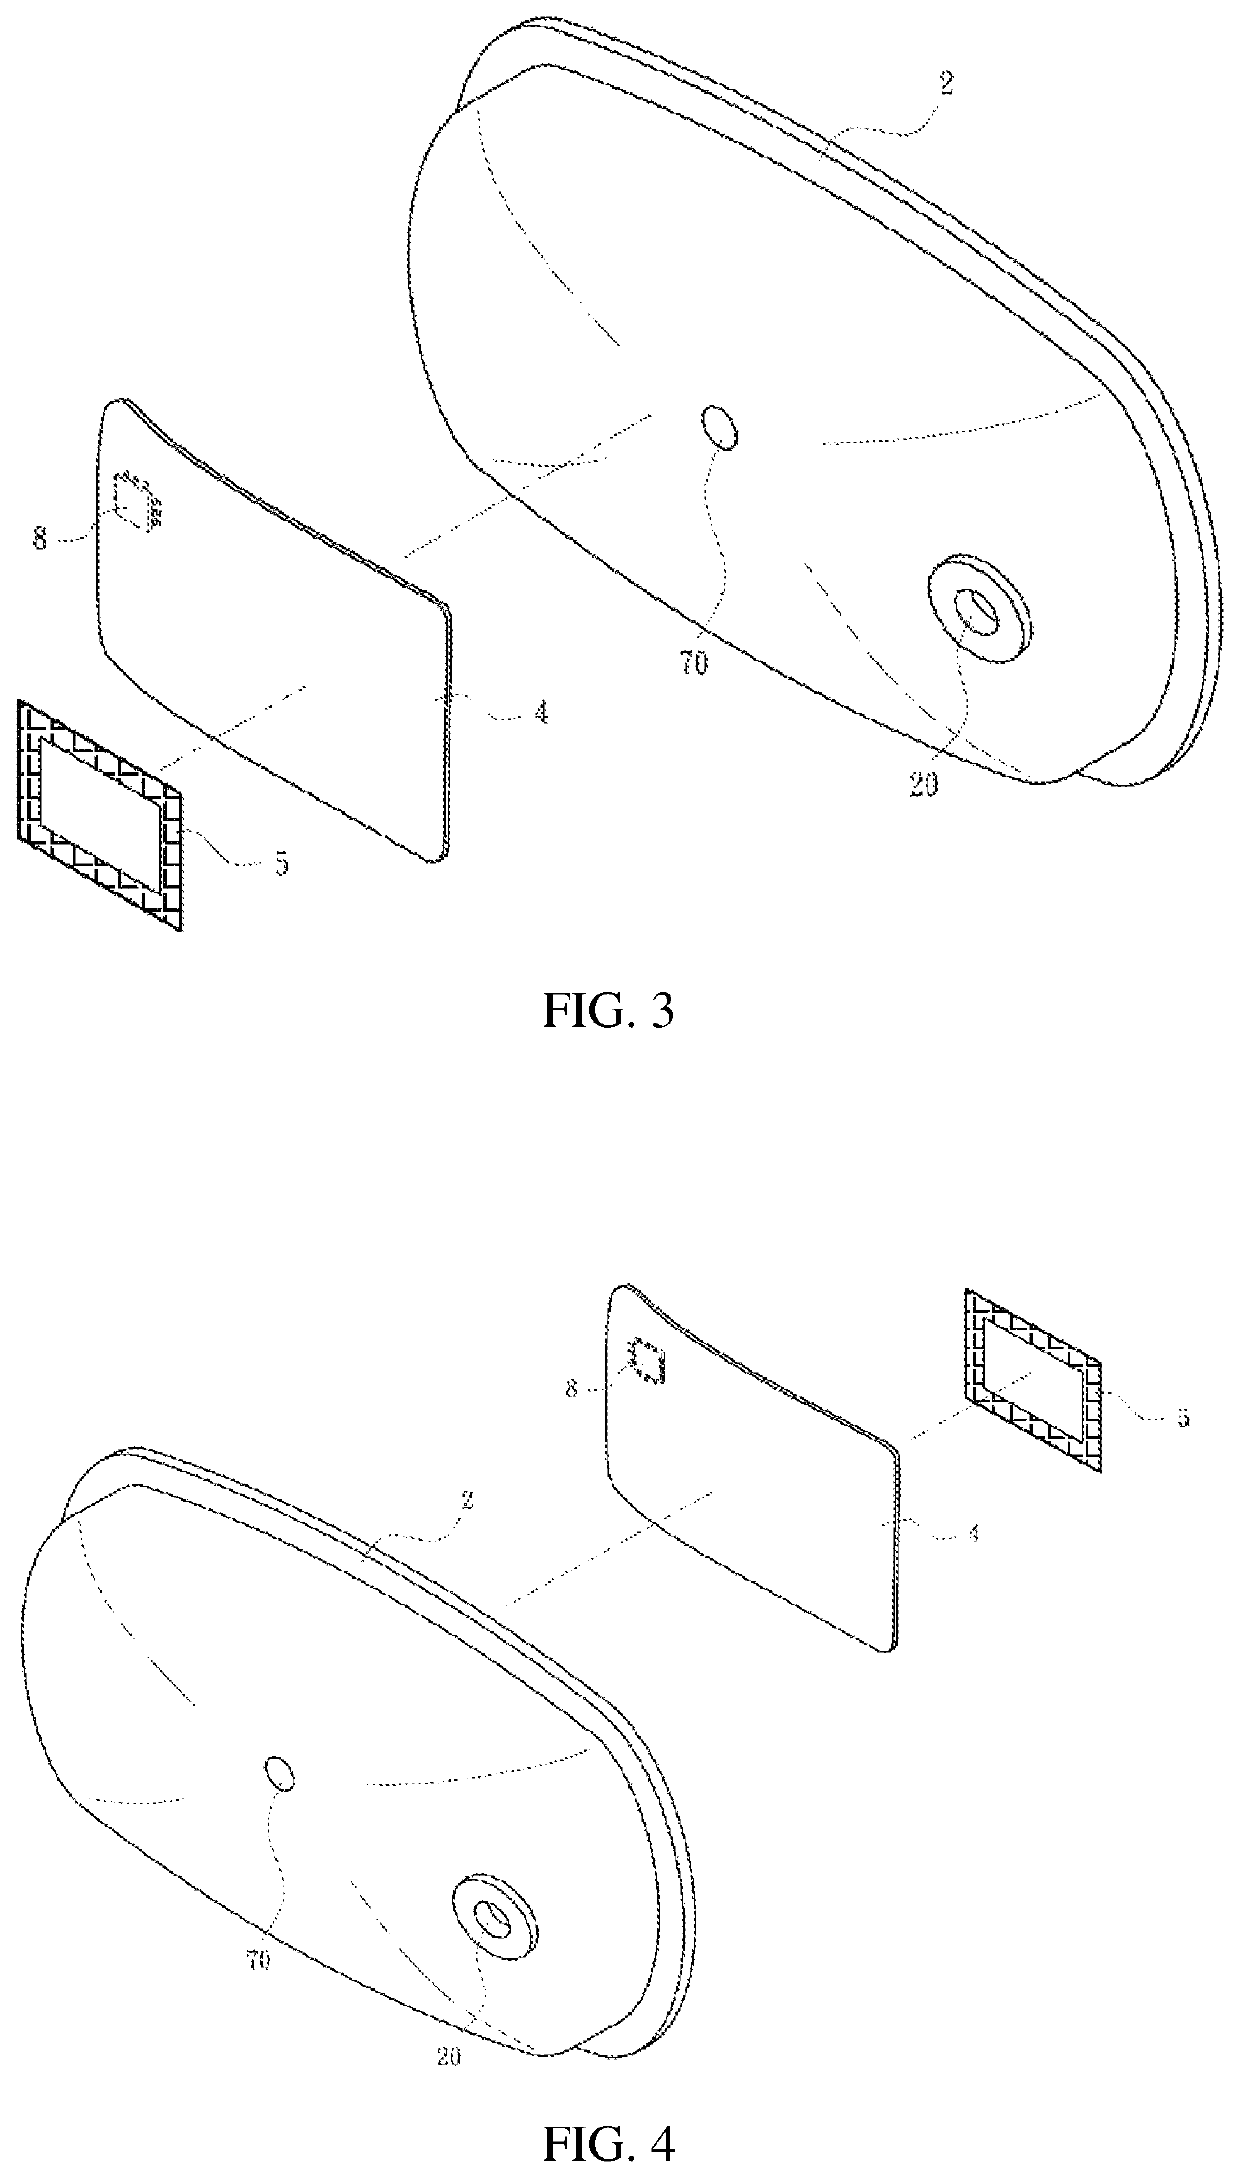 Capacitive sensing car-door pre-opening warning device based on a flexible printed circuit